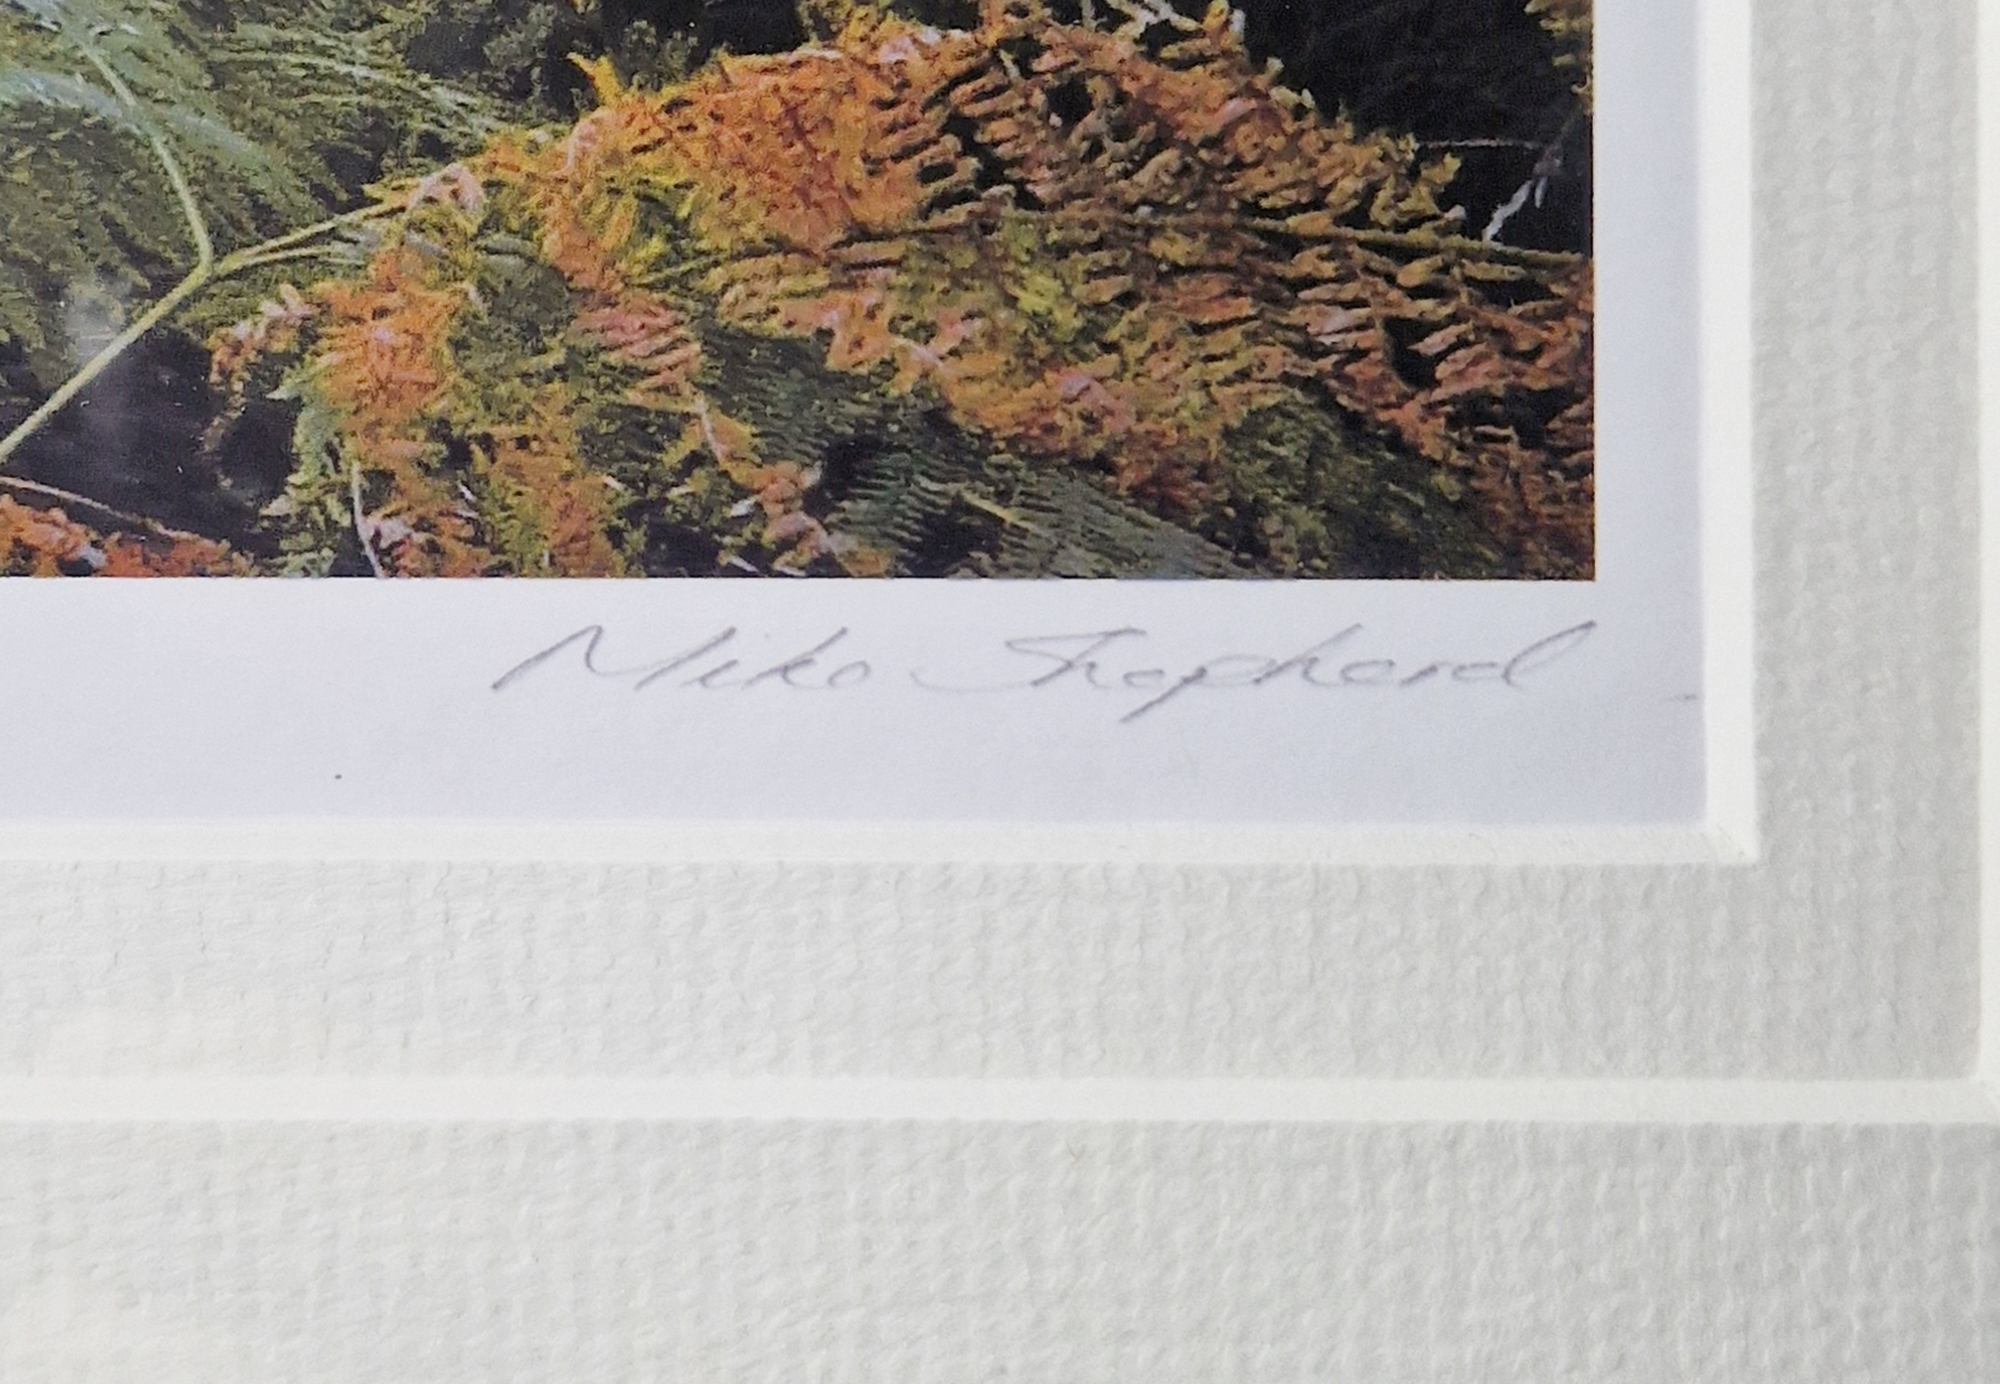 Mike Shepherd Photographic print 'Woodland Vision II', Artist's Proof, signed and titled in - Image 3 of 4